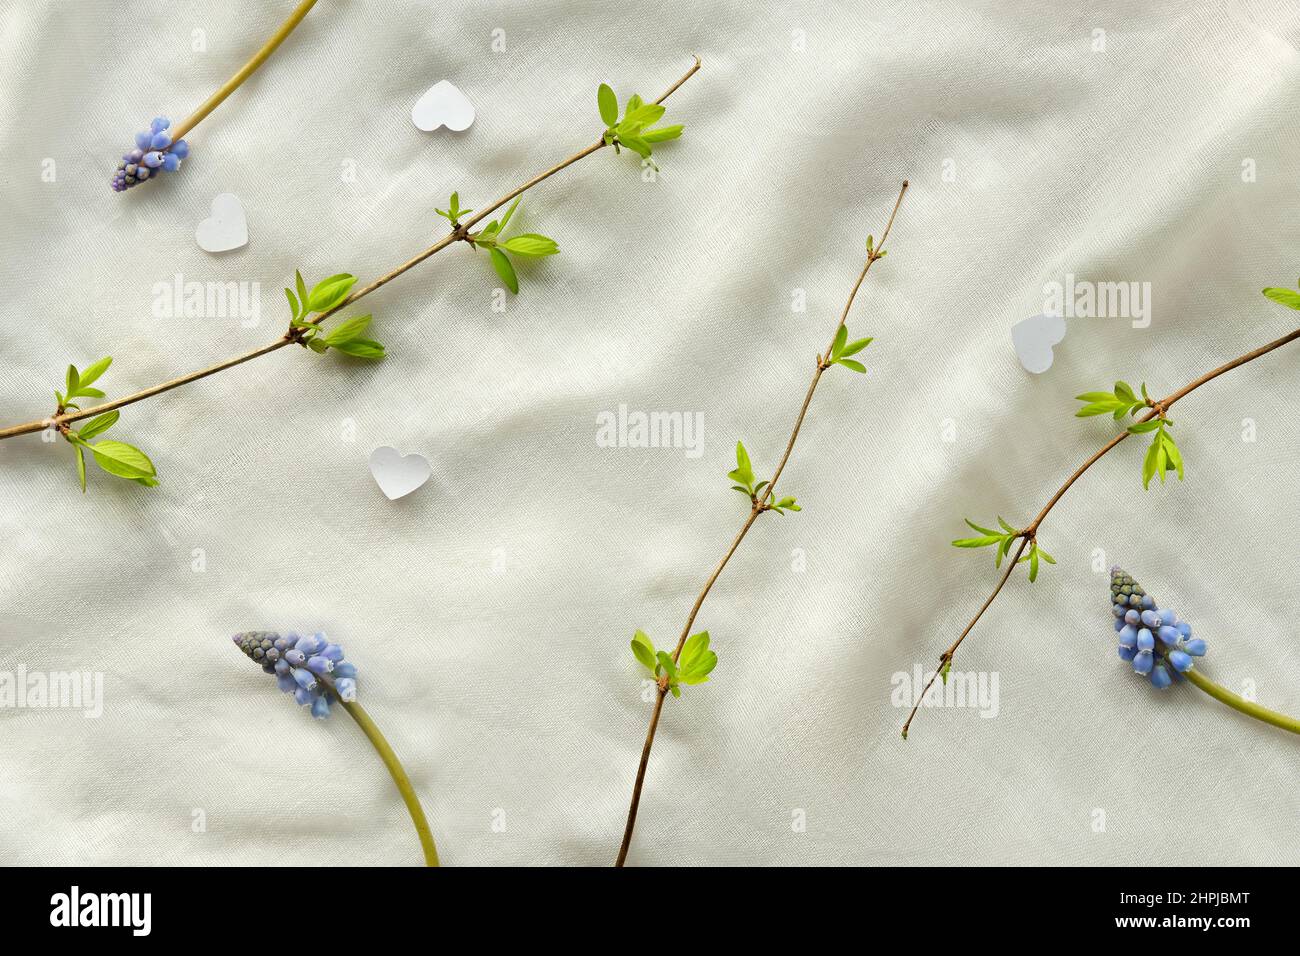 Springtime background. Green Spring leaves on twigs on white textile. Blue grape hyacinth flowers. Stock Photo